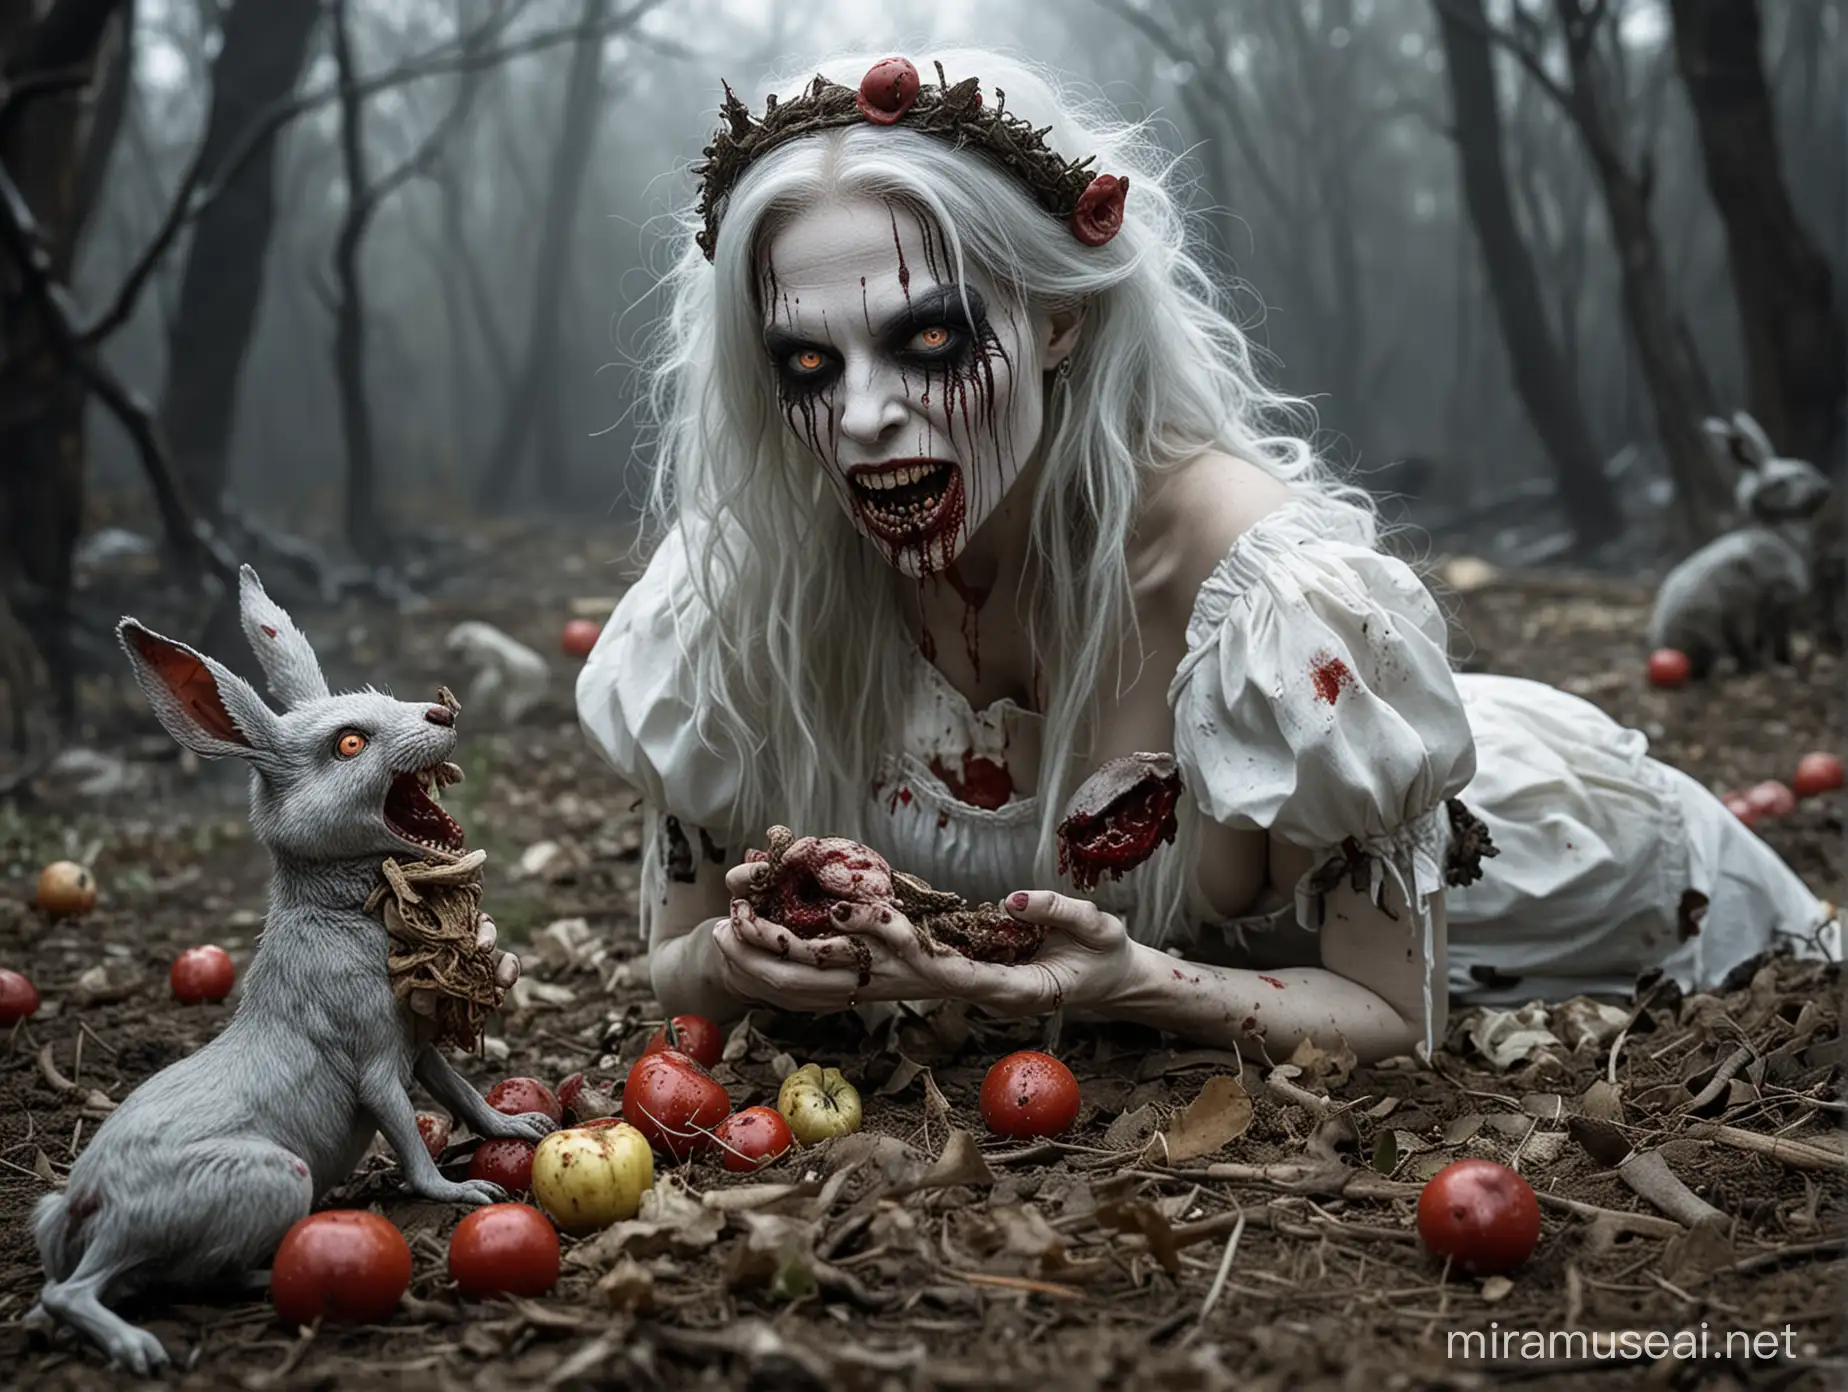 Undead Snow White Zombie Feasting on a Rotten Rabbit